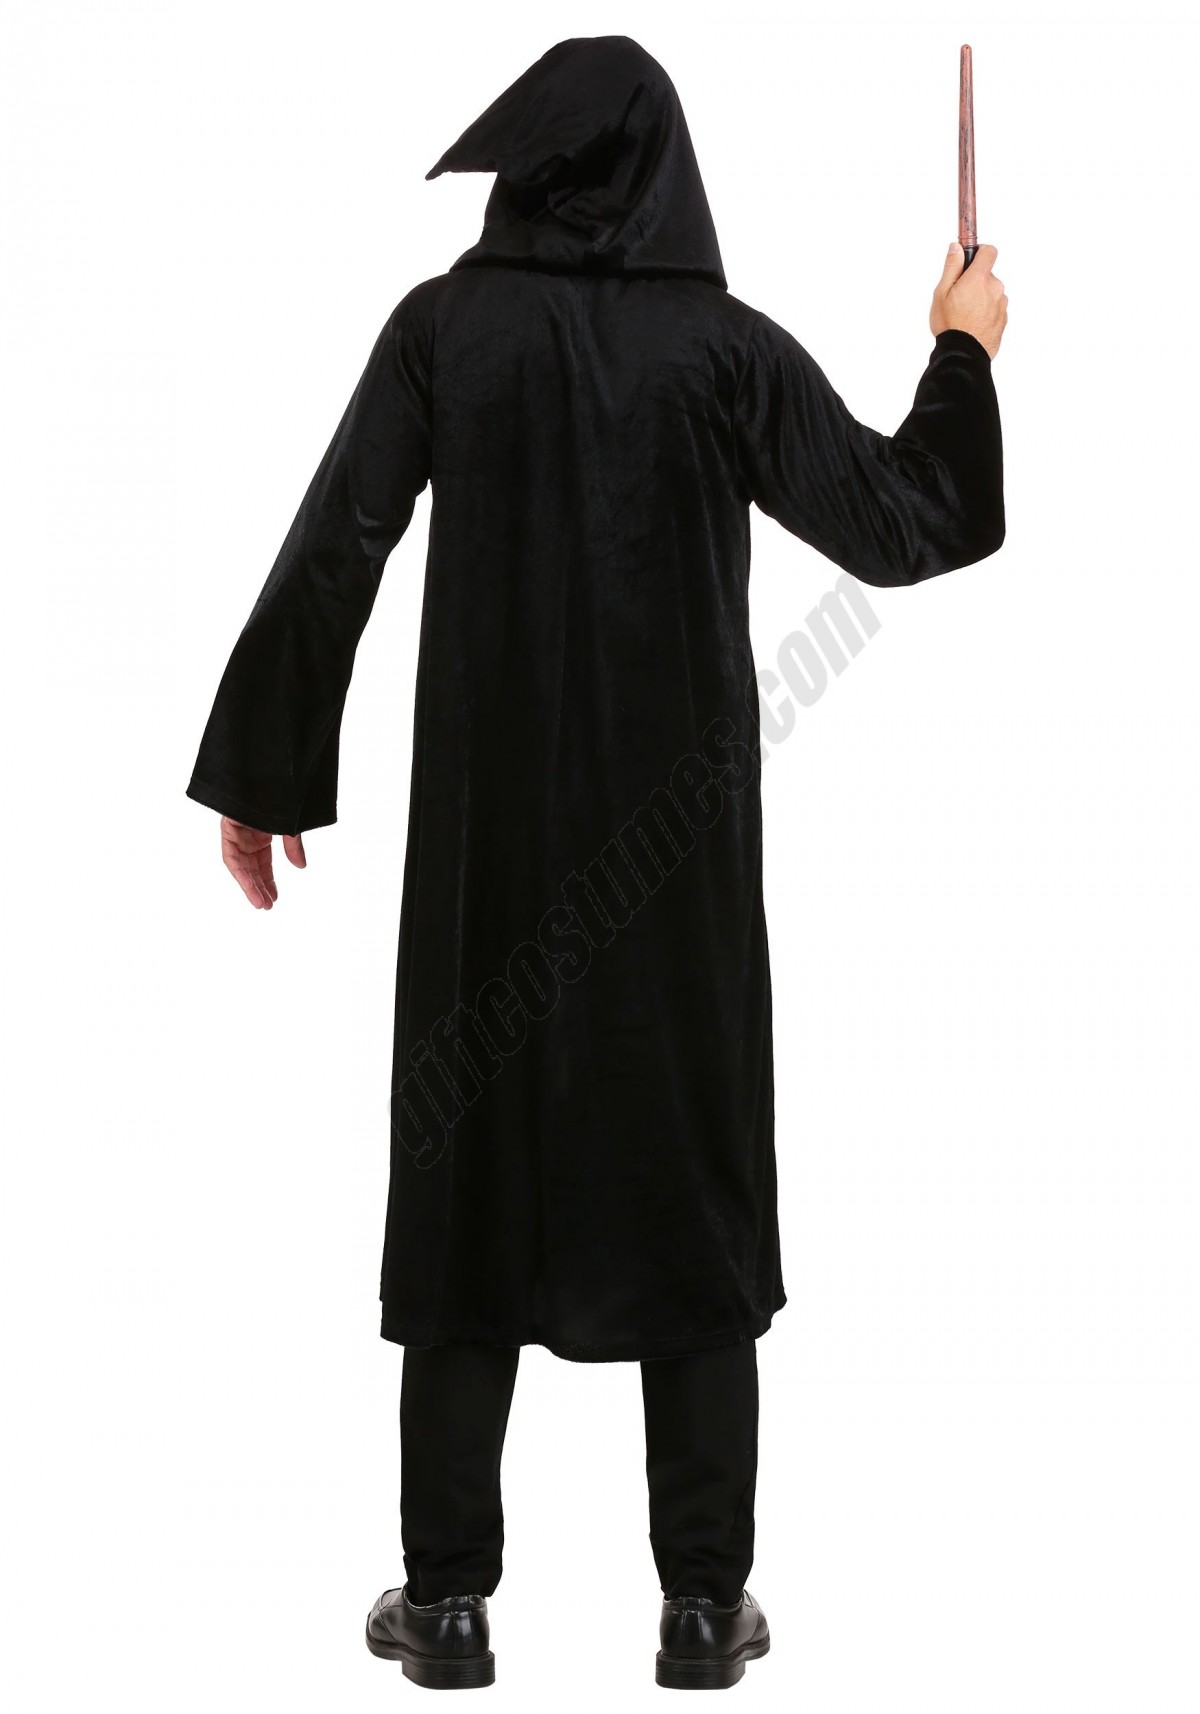 Deluxe Harry Potter Slytherin Adult Plus Size Robe Costume Promotions - -4